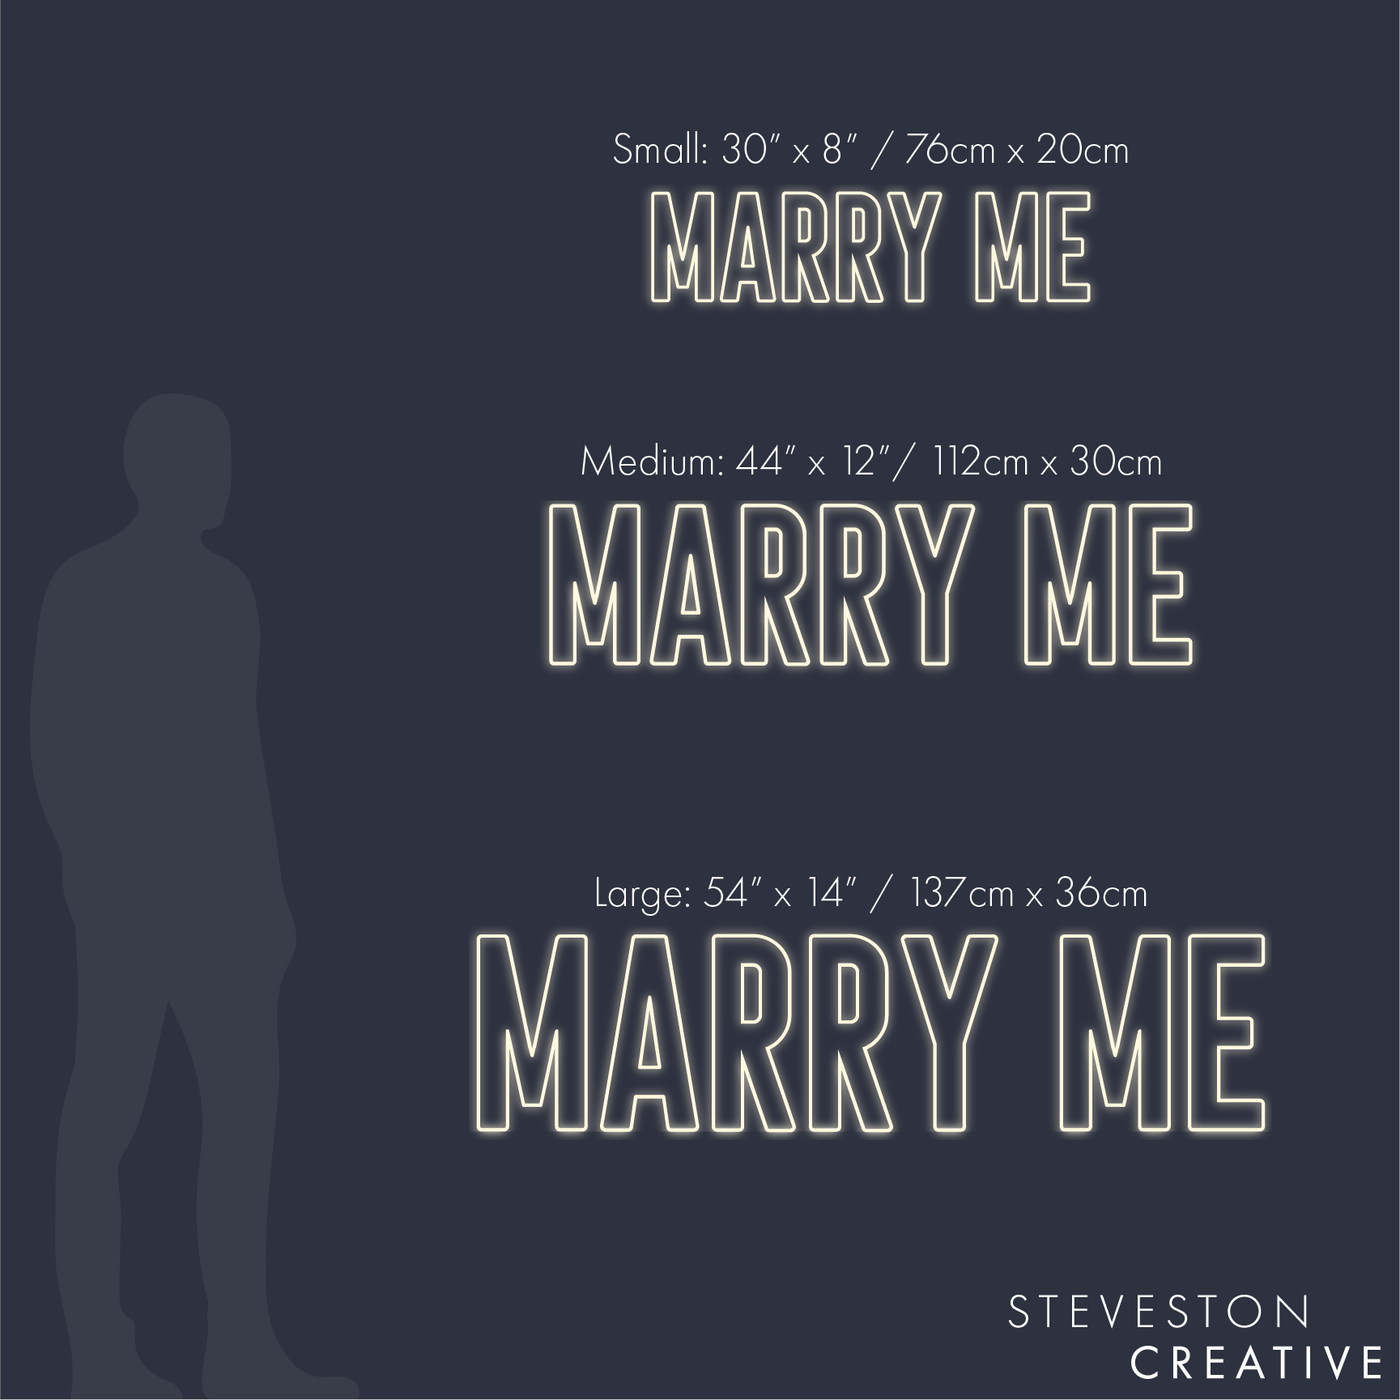 "MARRY ME" (Outlined)